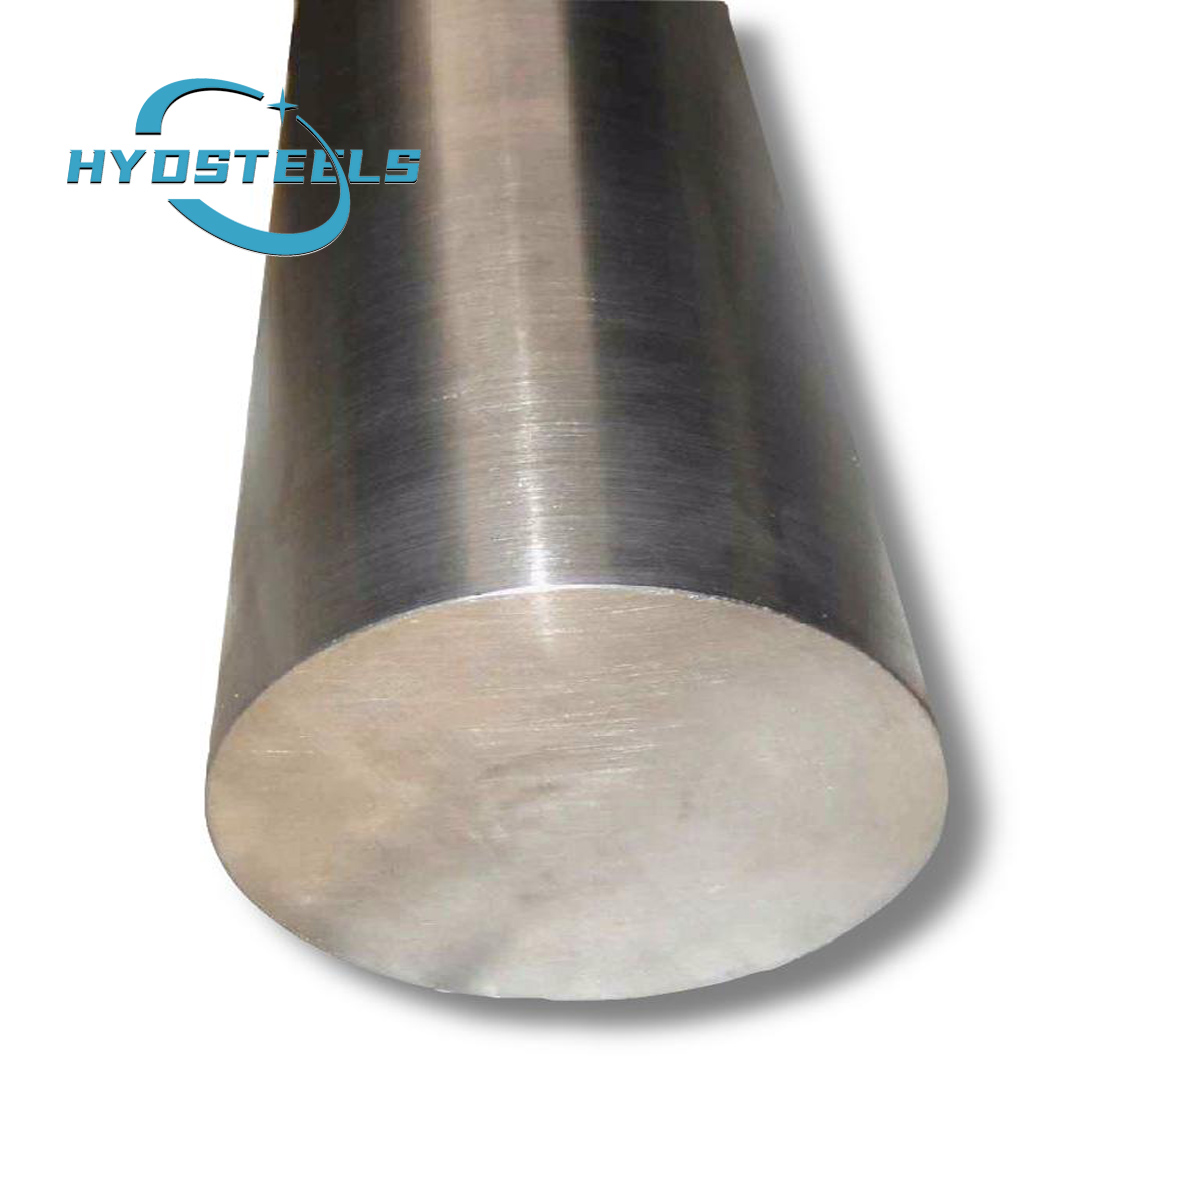  High Quality Hard Chrome Rod for Hydraulic Cylinder Manufacturer